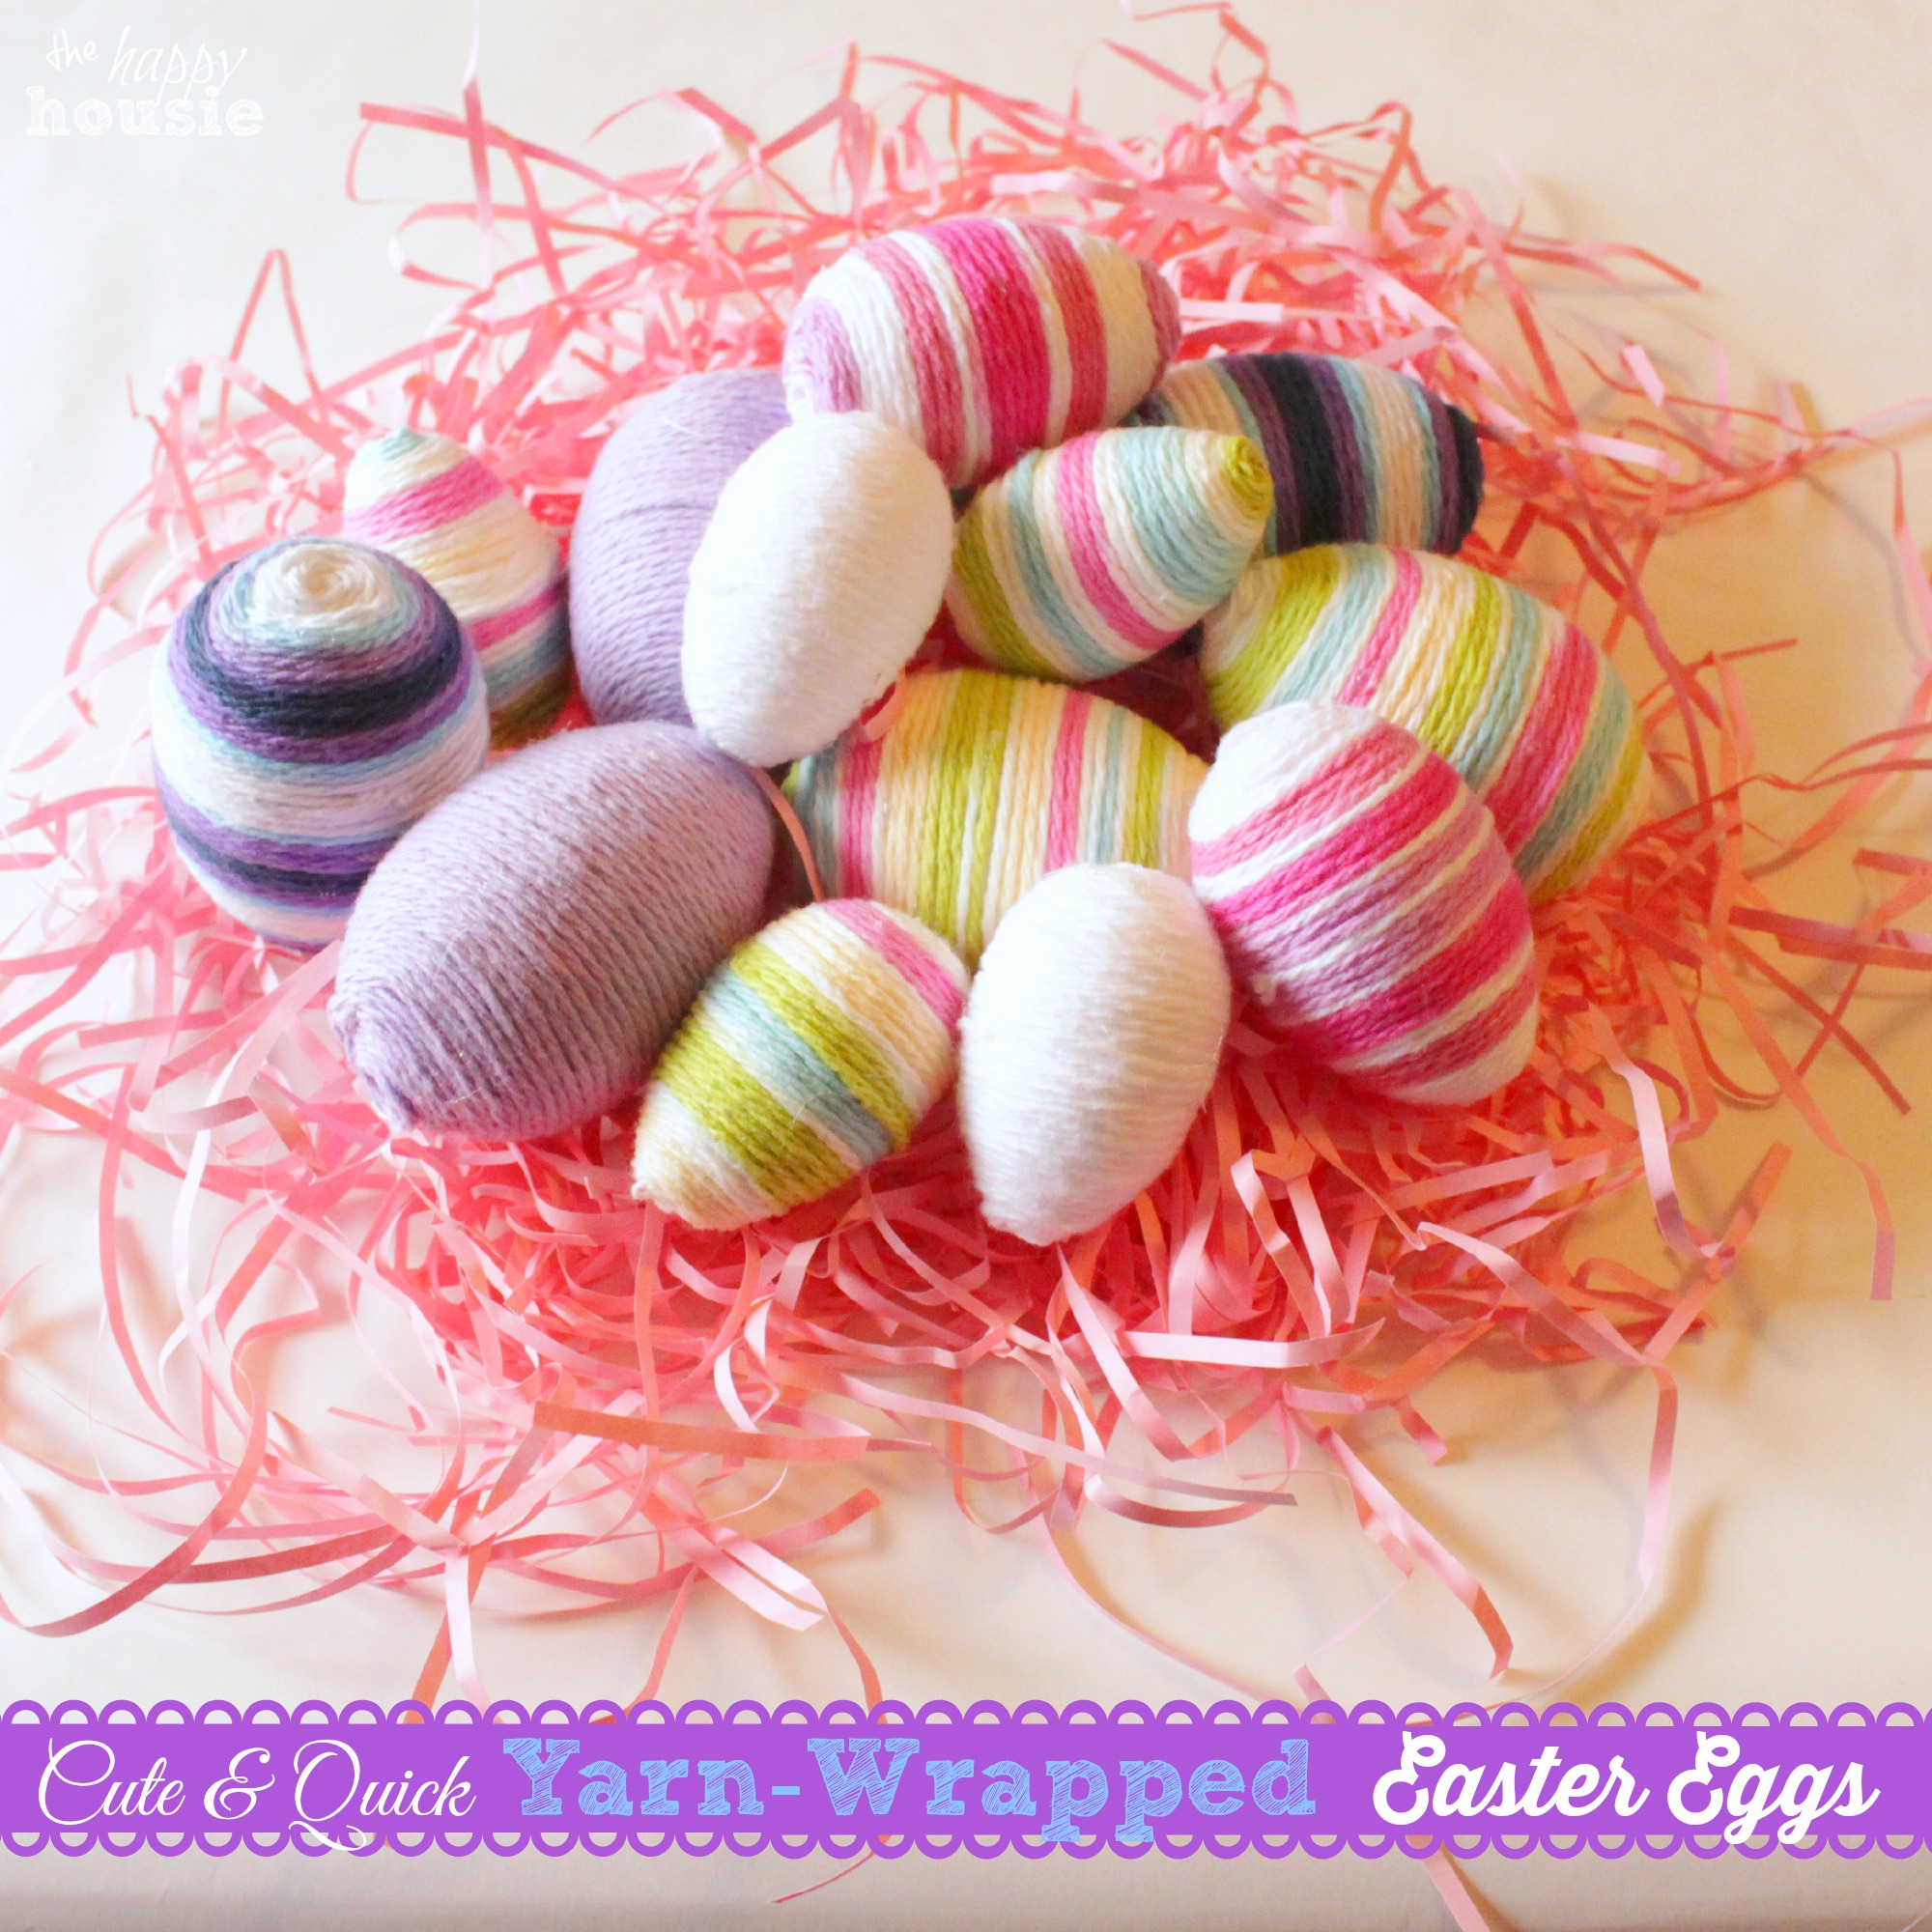 Cute and Quick Yarn Wrapped Easter Eggs at The Happy Housie